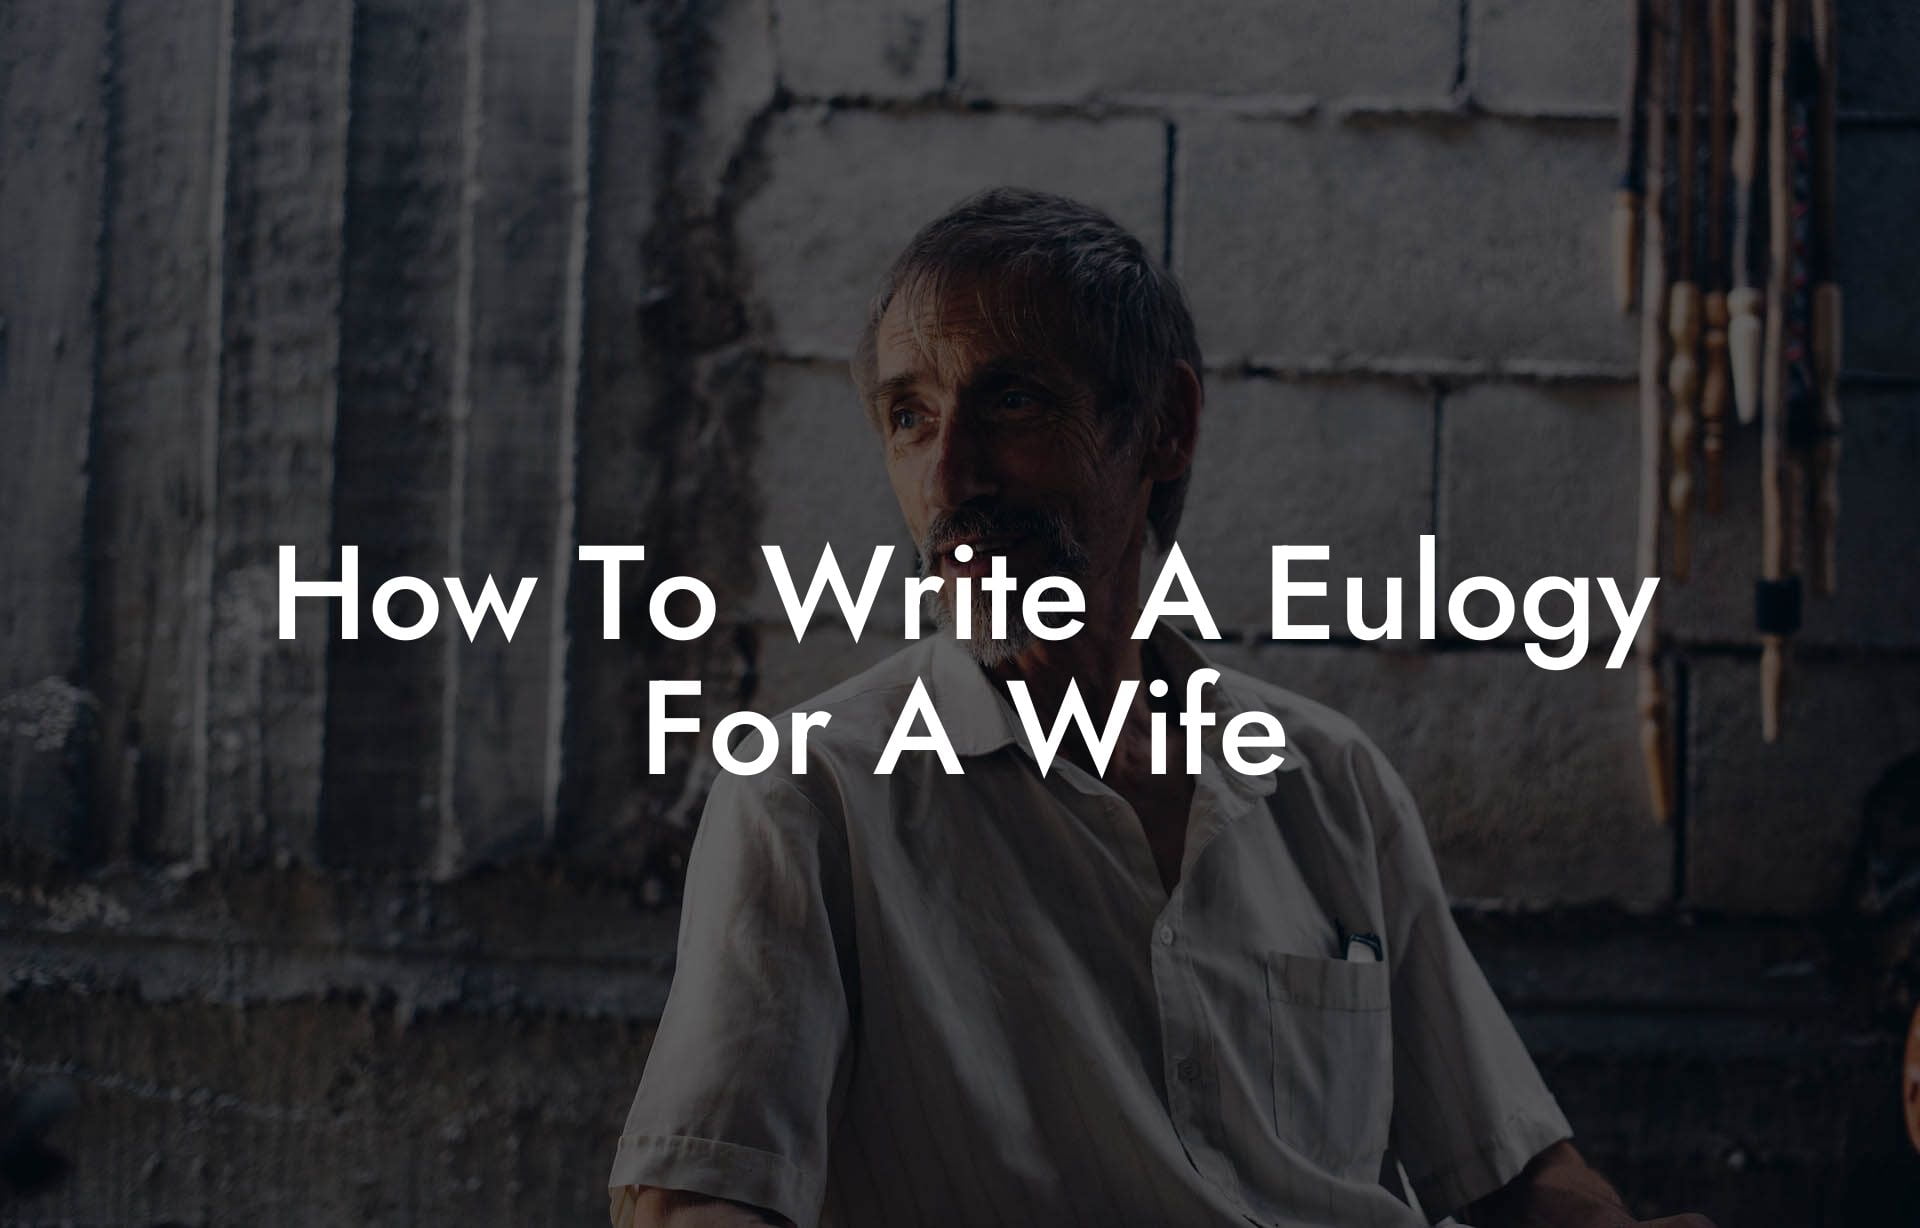 How To Write A Eulogy For A Wife